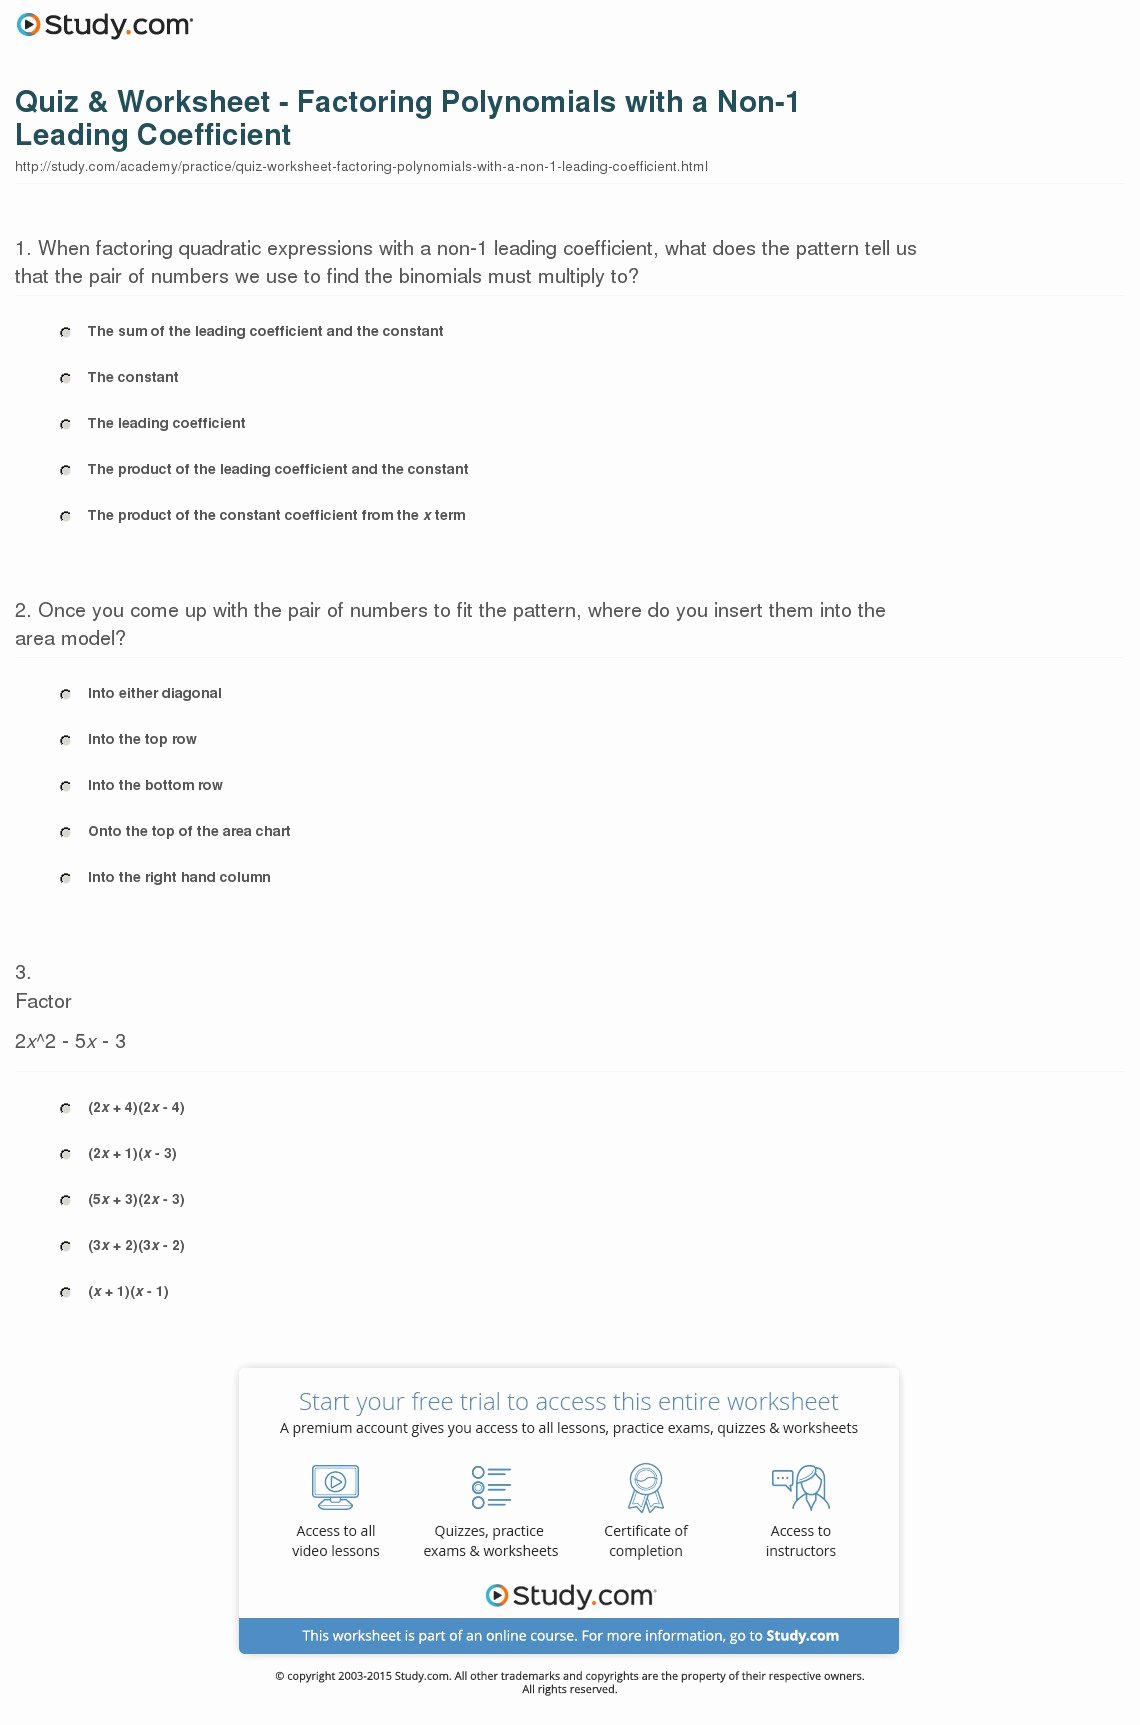 Factoring Practice Worksheet Answers Lovely Quiz &amp; Worksheet Factoring Polynomials with A Non 1